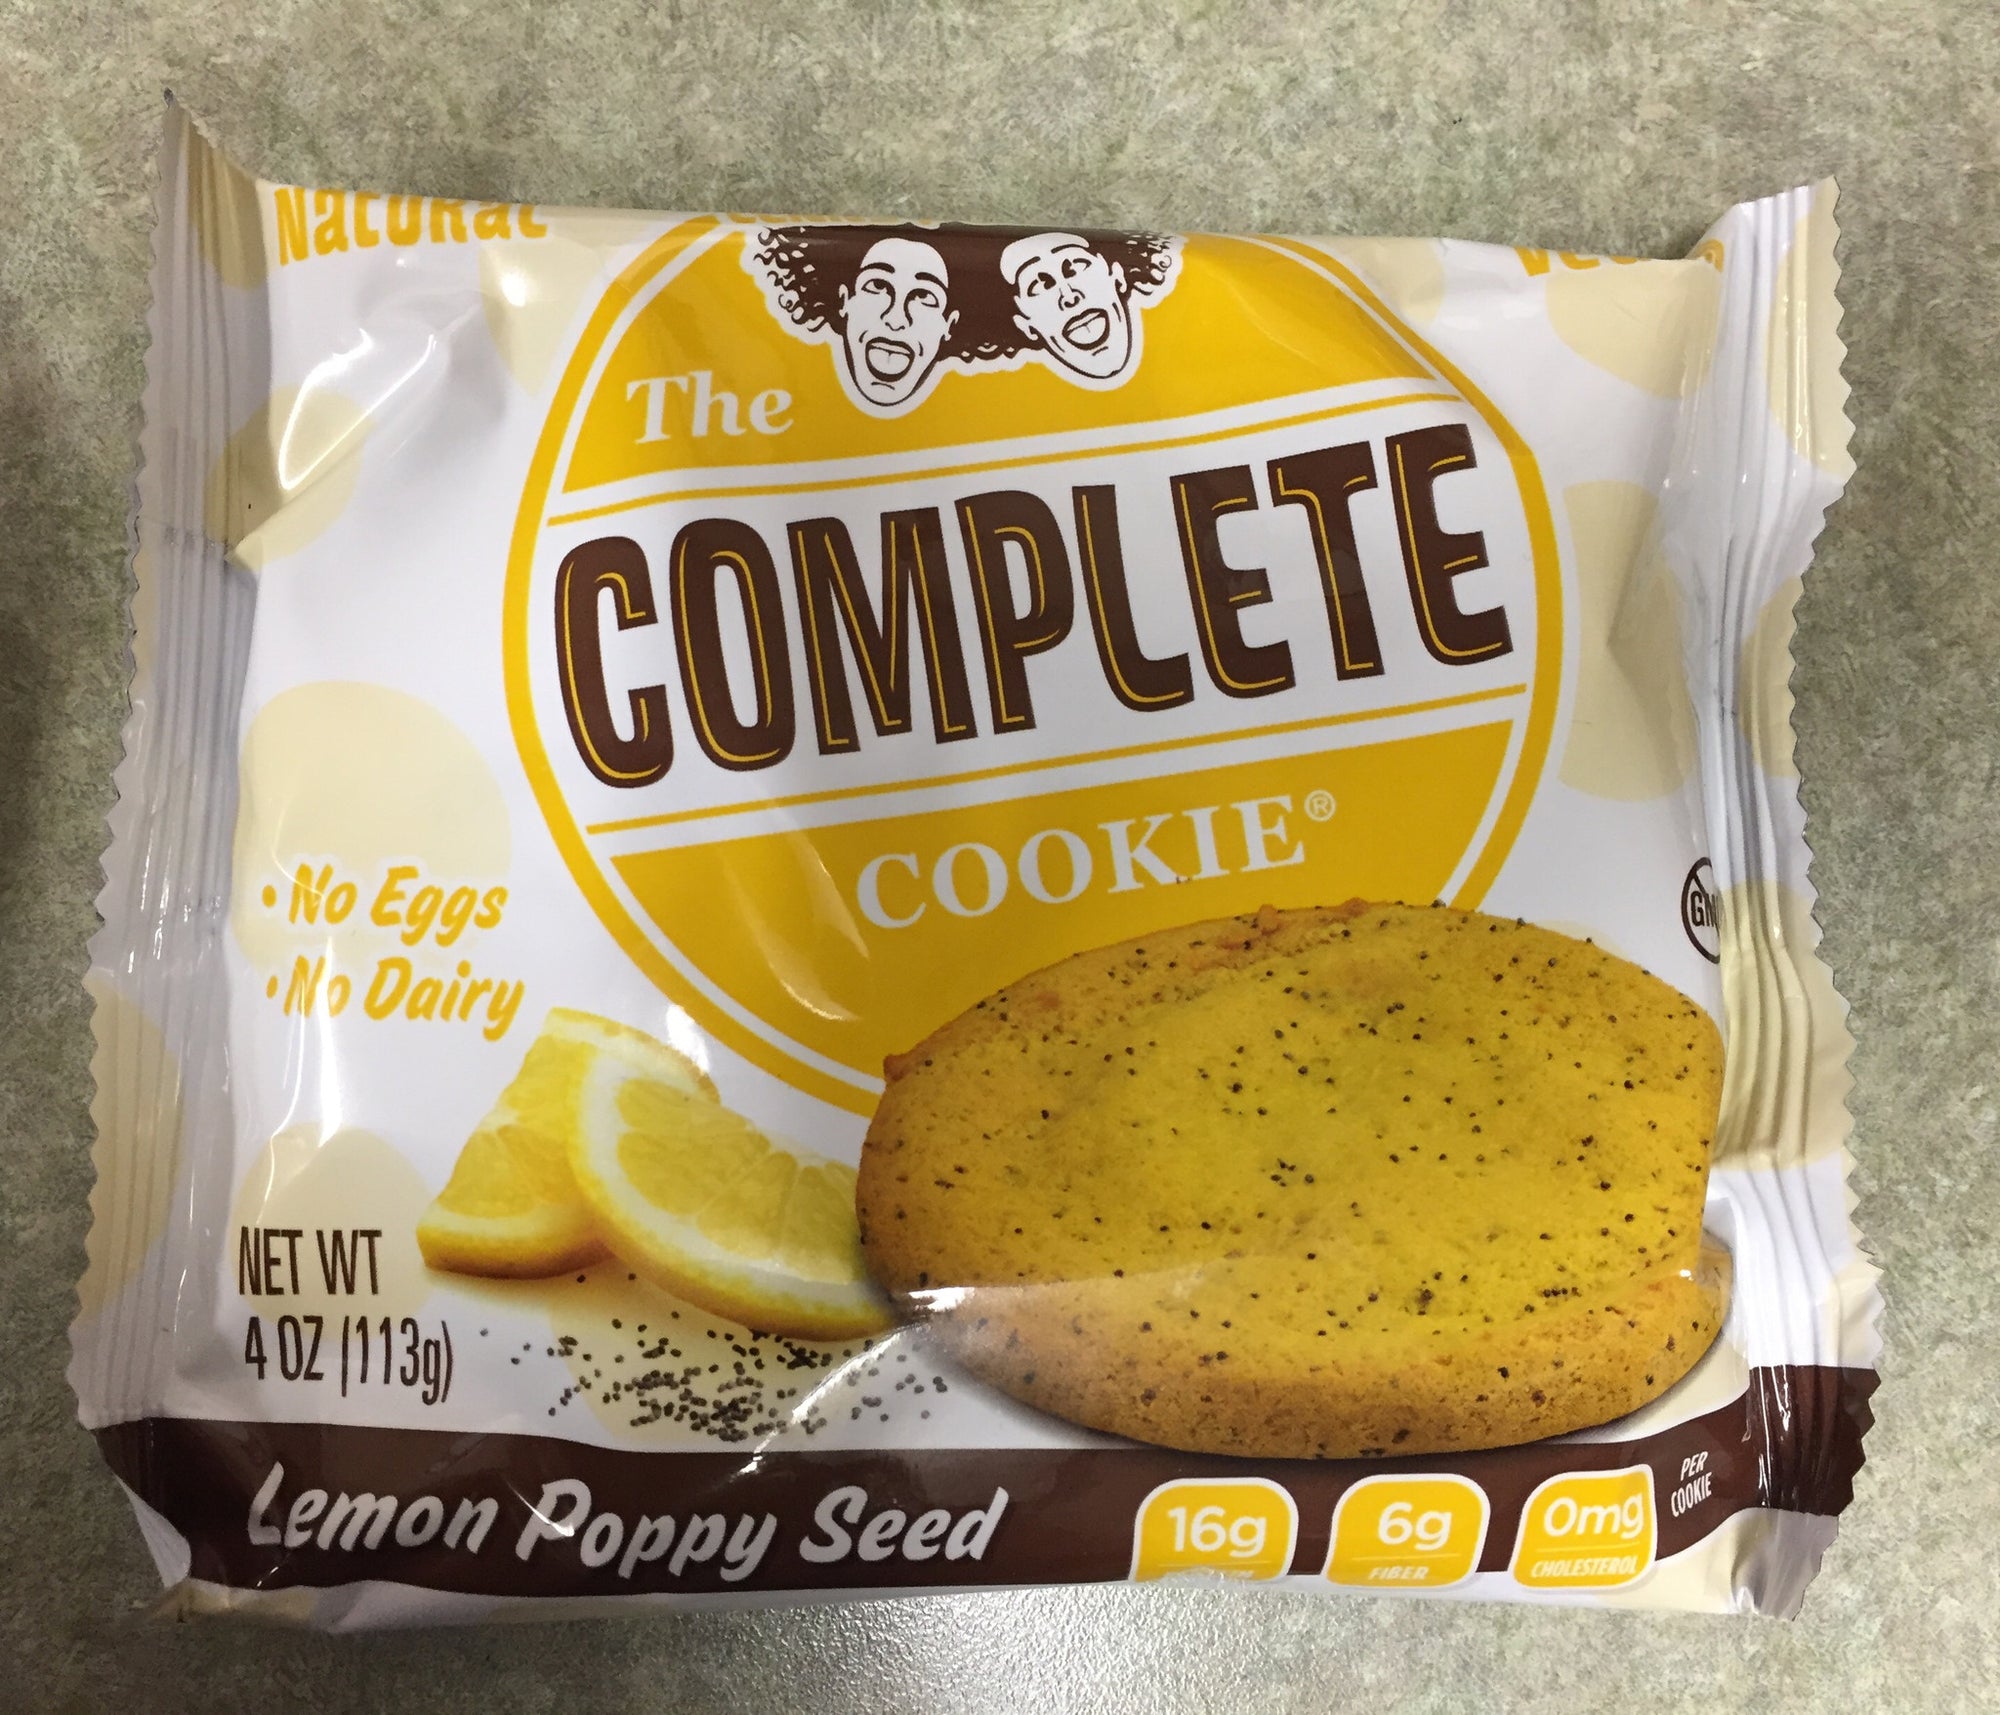 MY FAVORITE NEW COOKIE